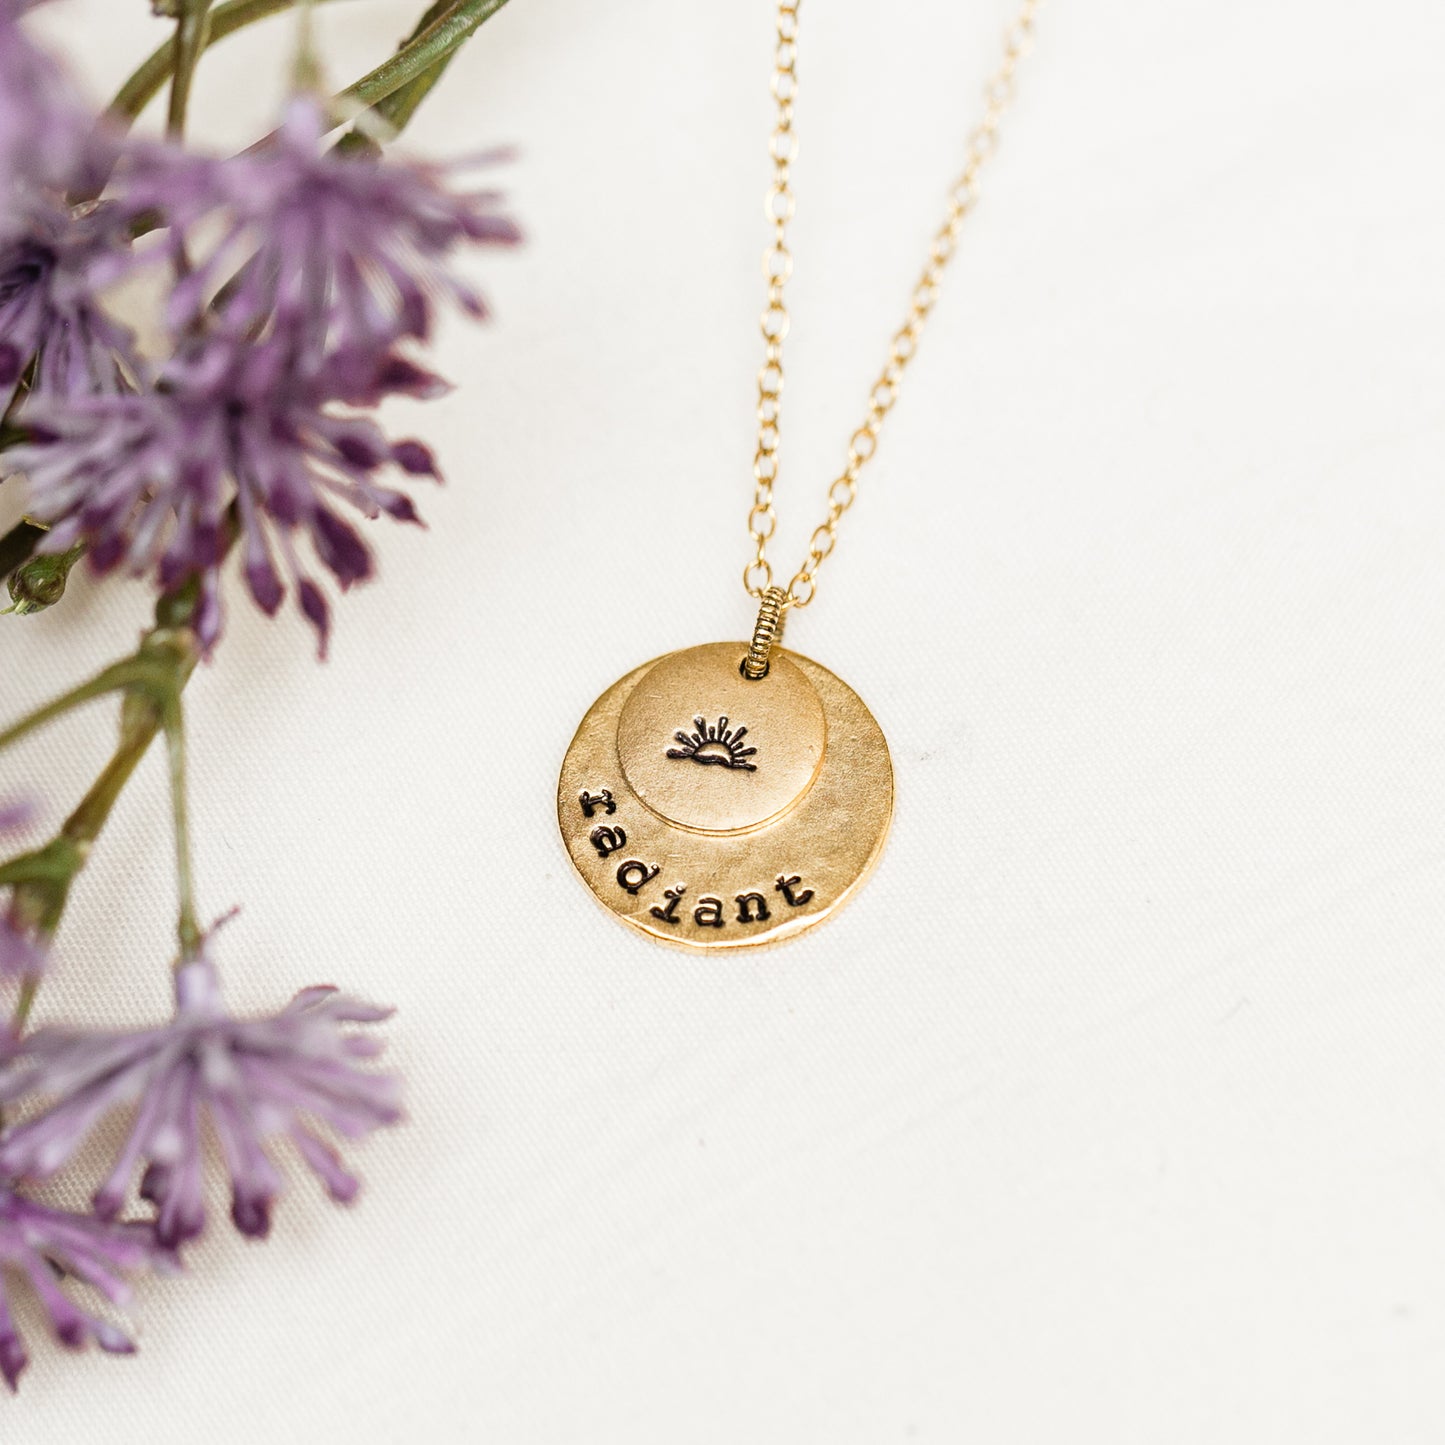 Heaven Inspired Myra Necklace - Gold